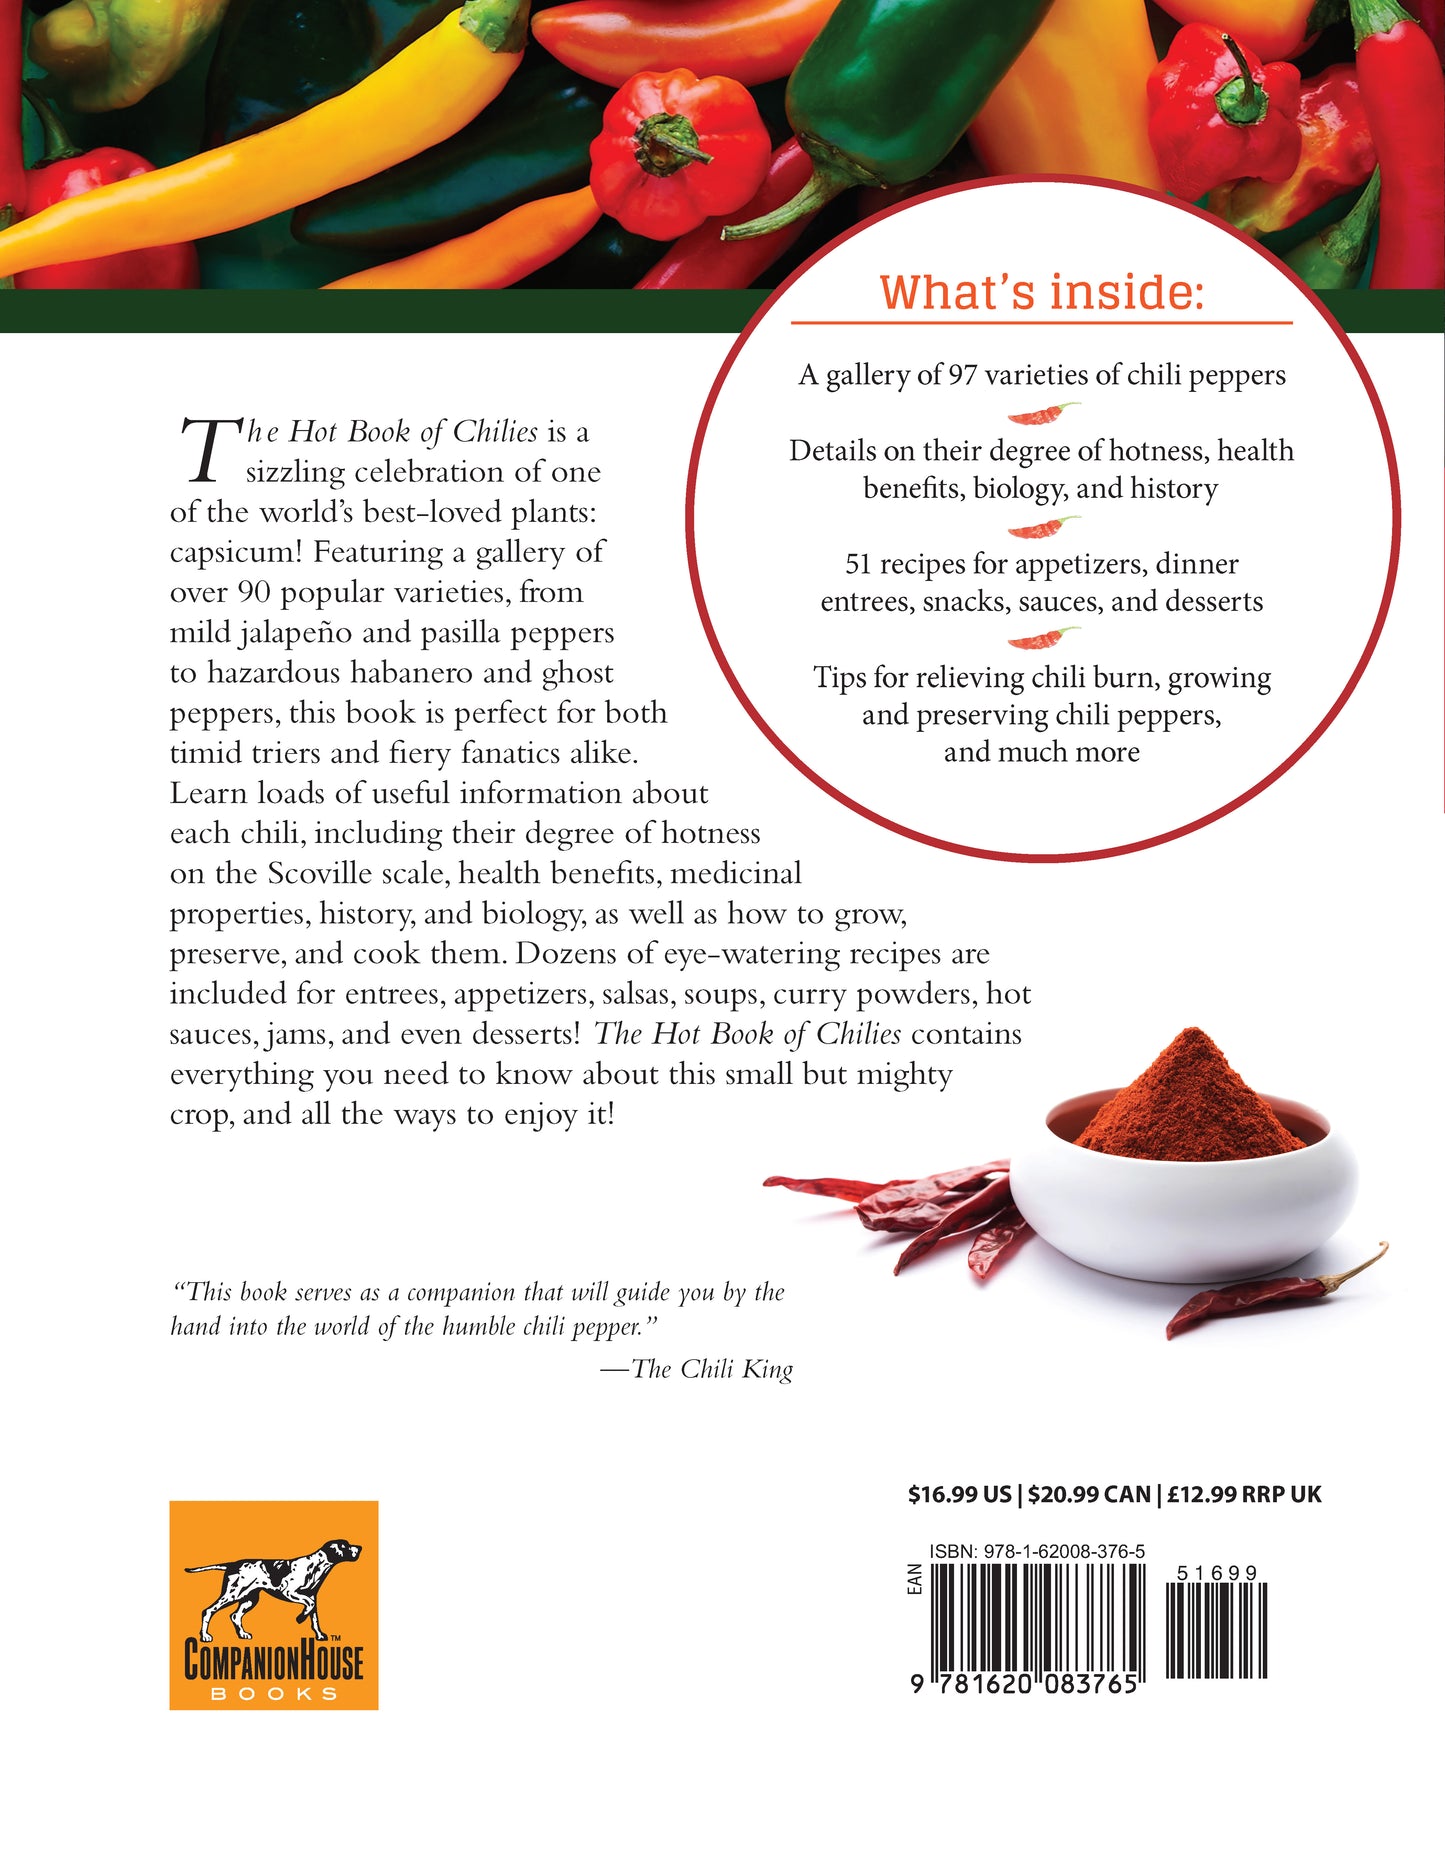 The Hot Book of Chilies, 3rd Edition